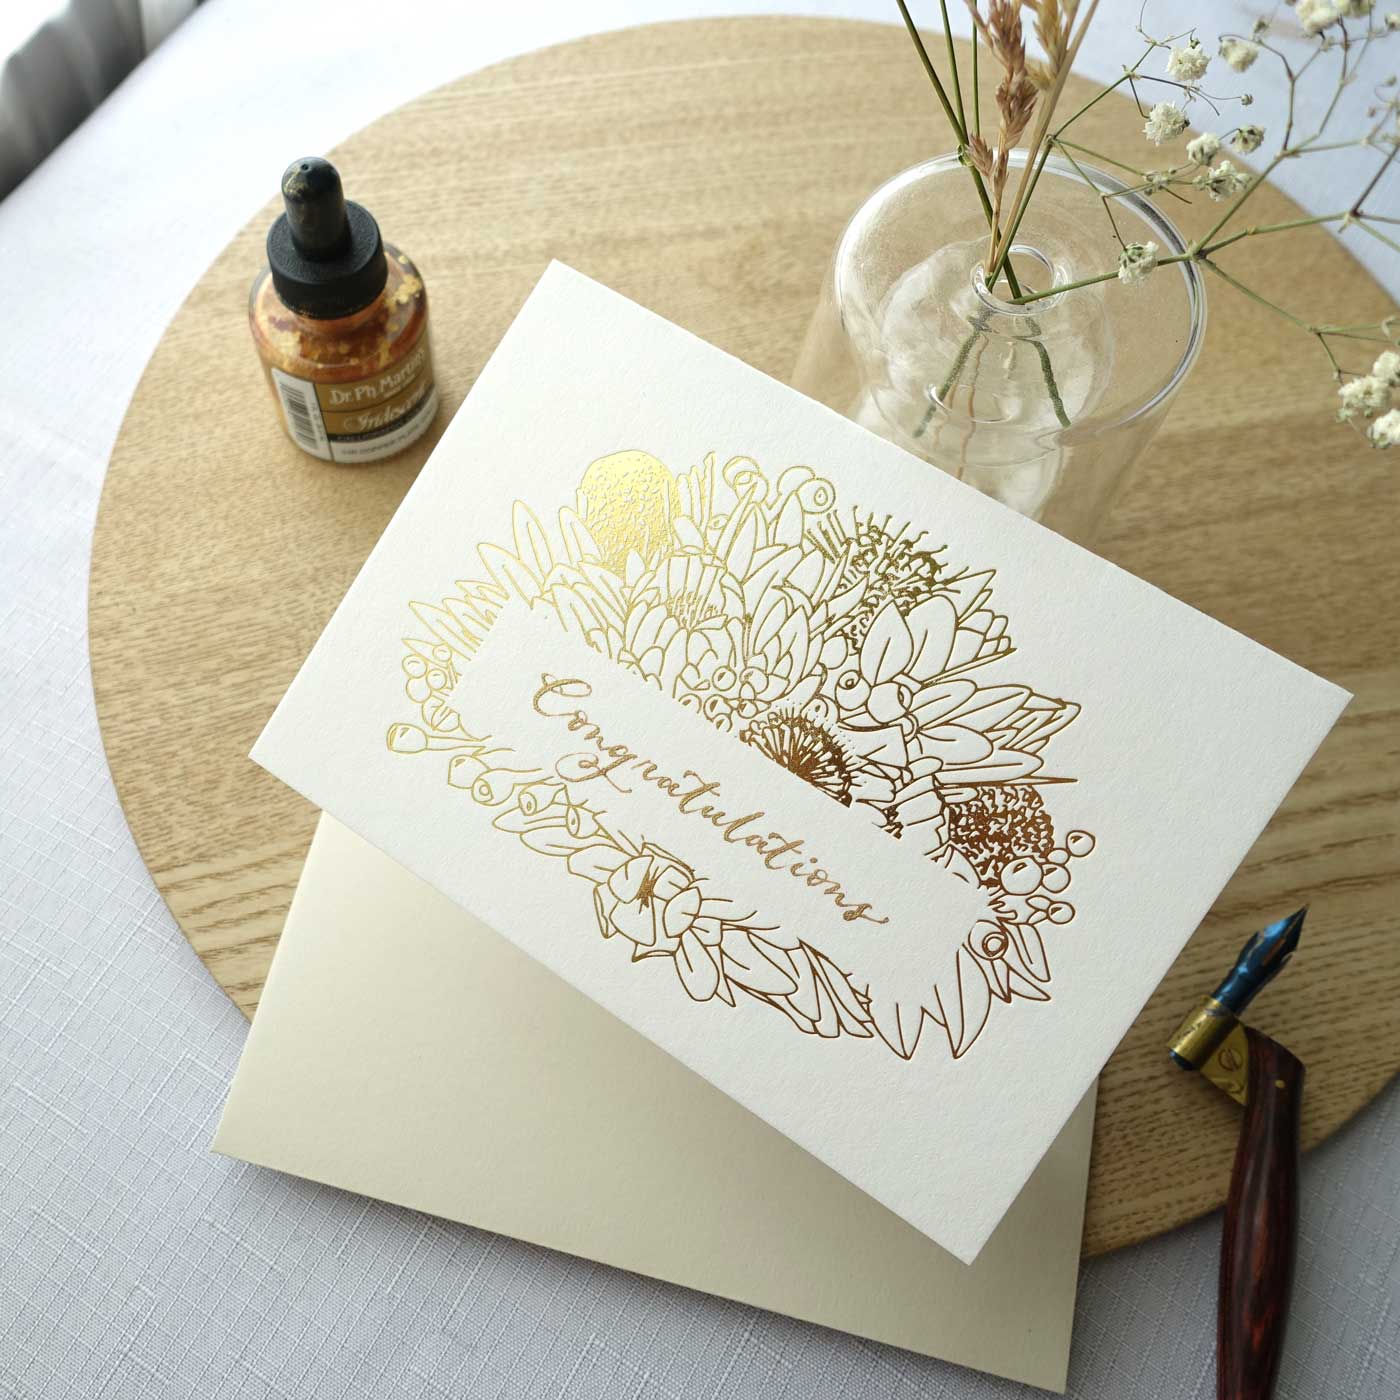 Gold foiled greeting card with Congratulations handwritten in calligraphy